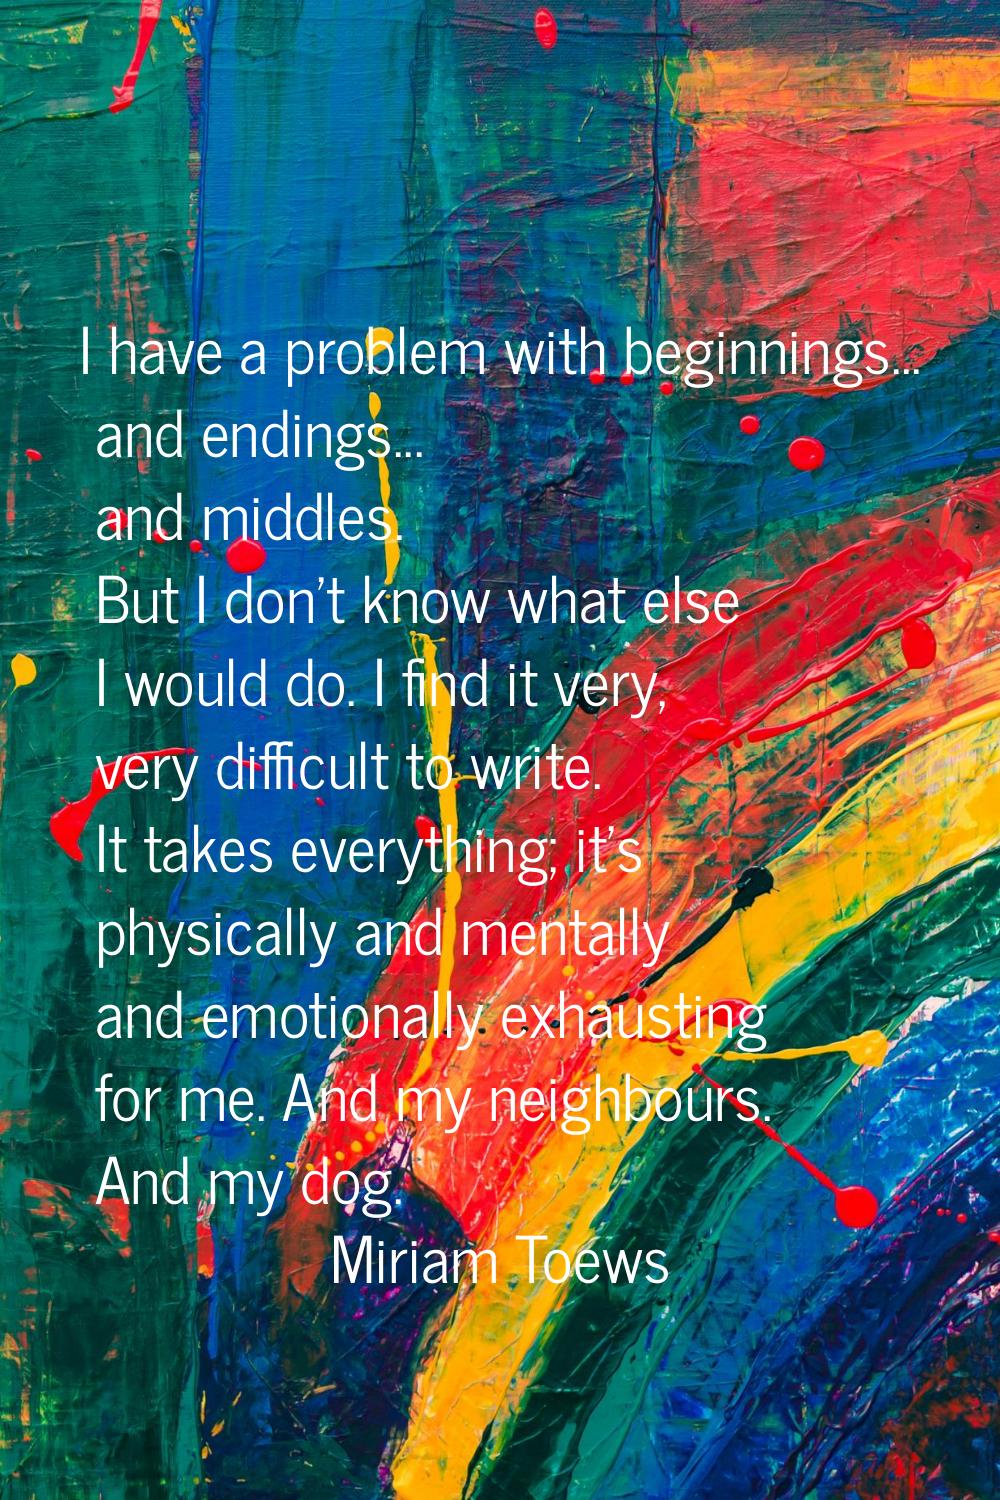 I have a problem with beginnings... and endings... and middles. But I don't know what else I would 